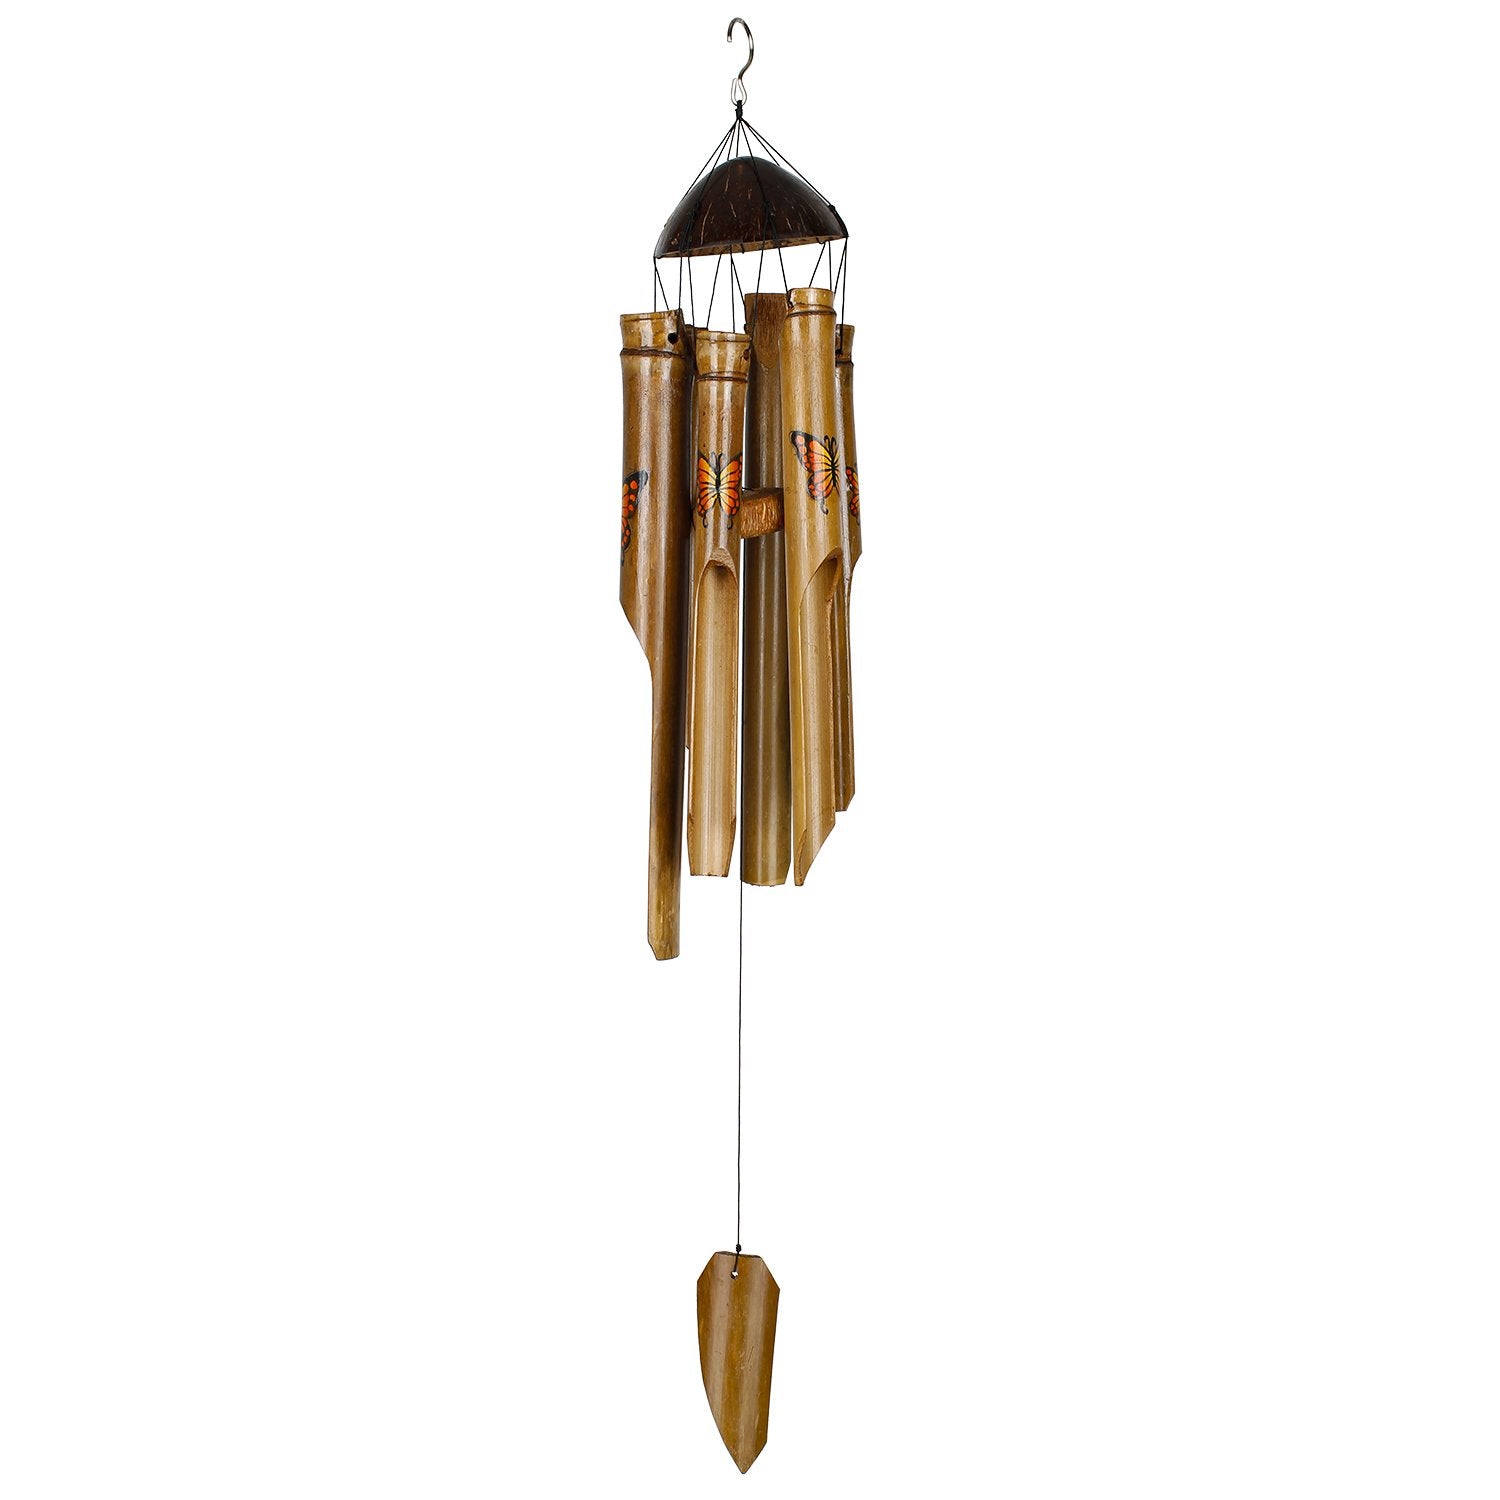 Butterfly Bamboo Chime - Orange full product image